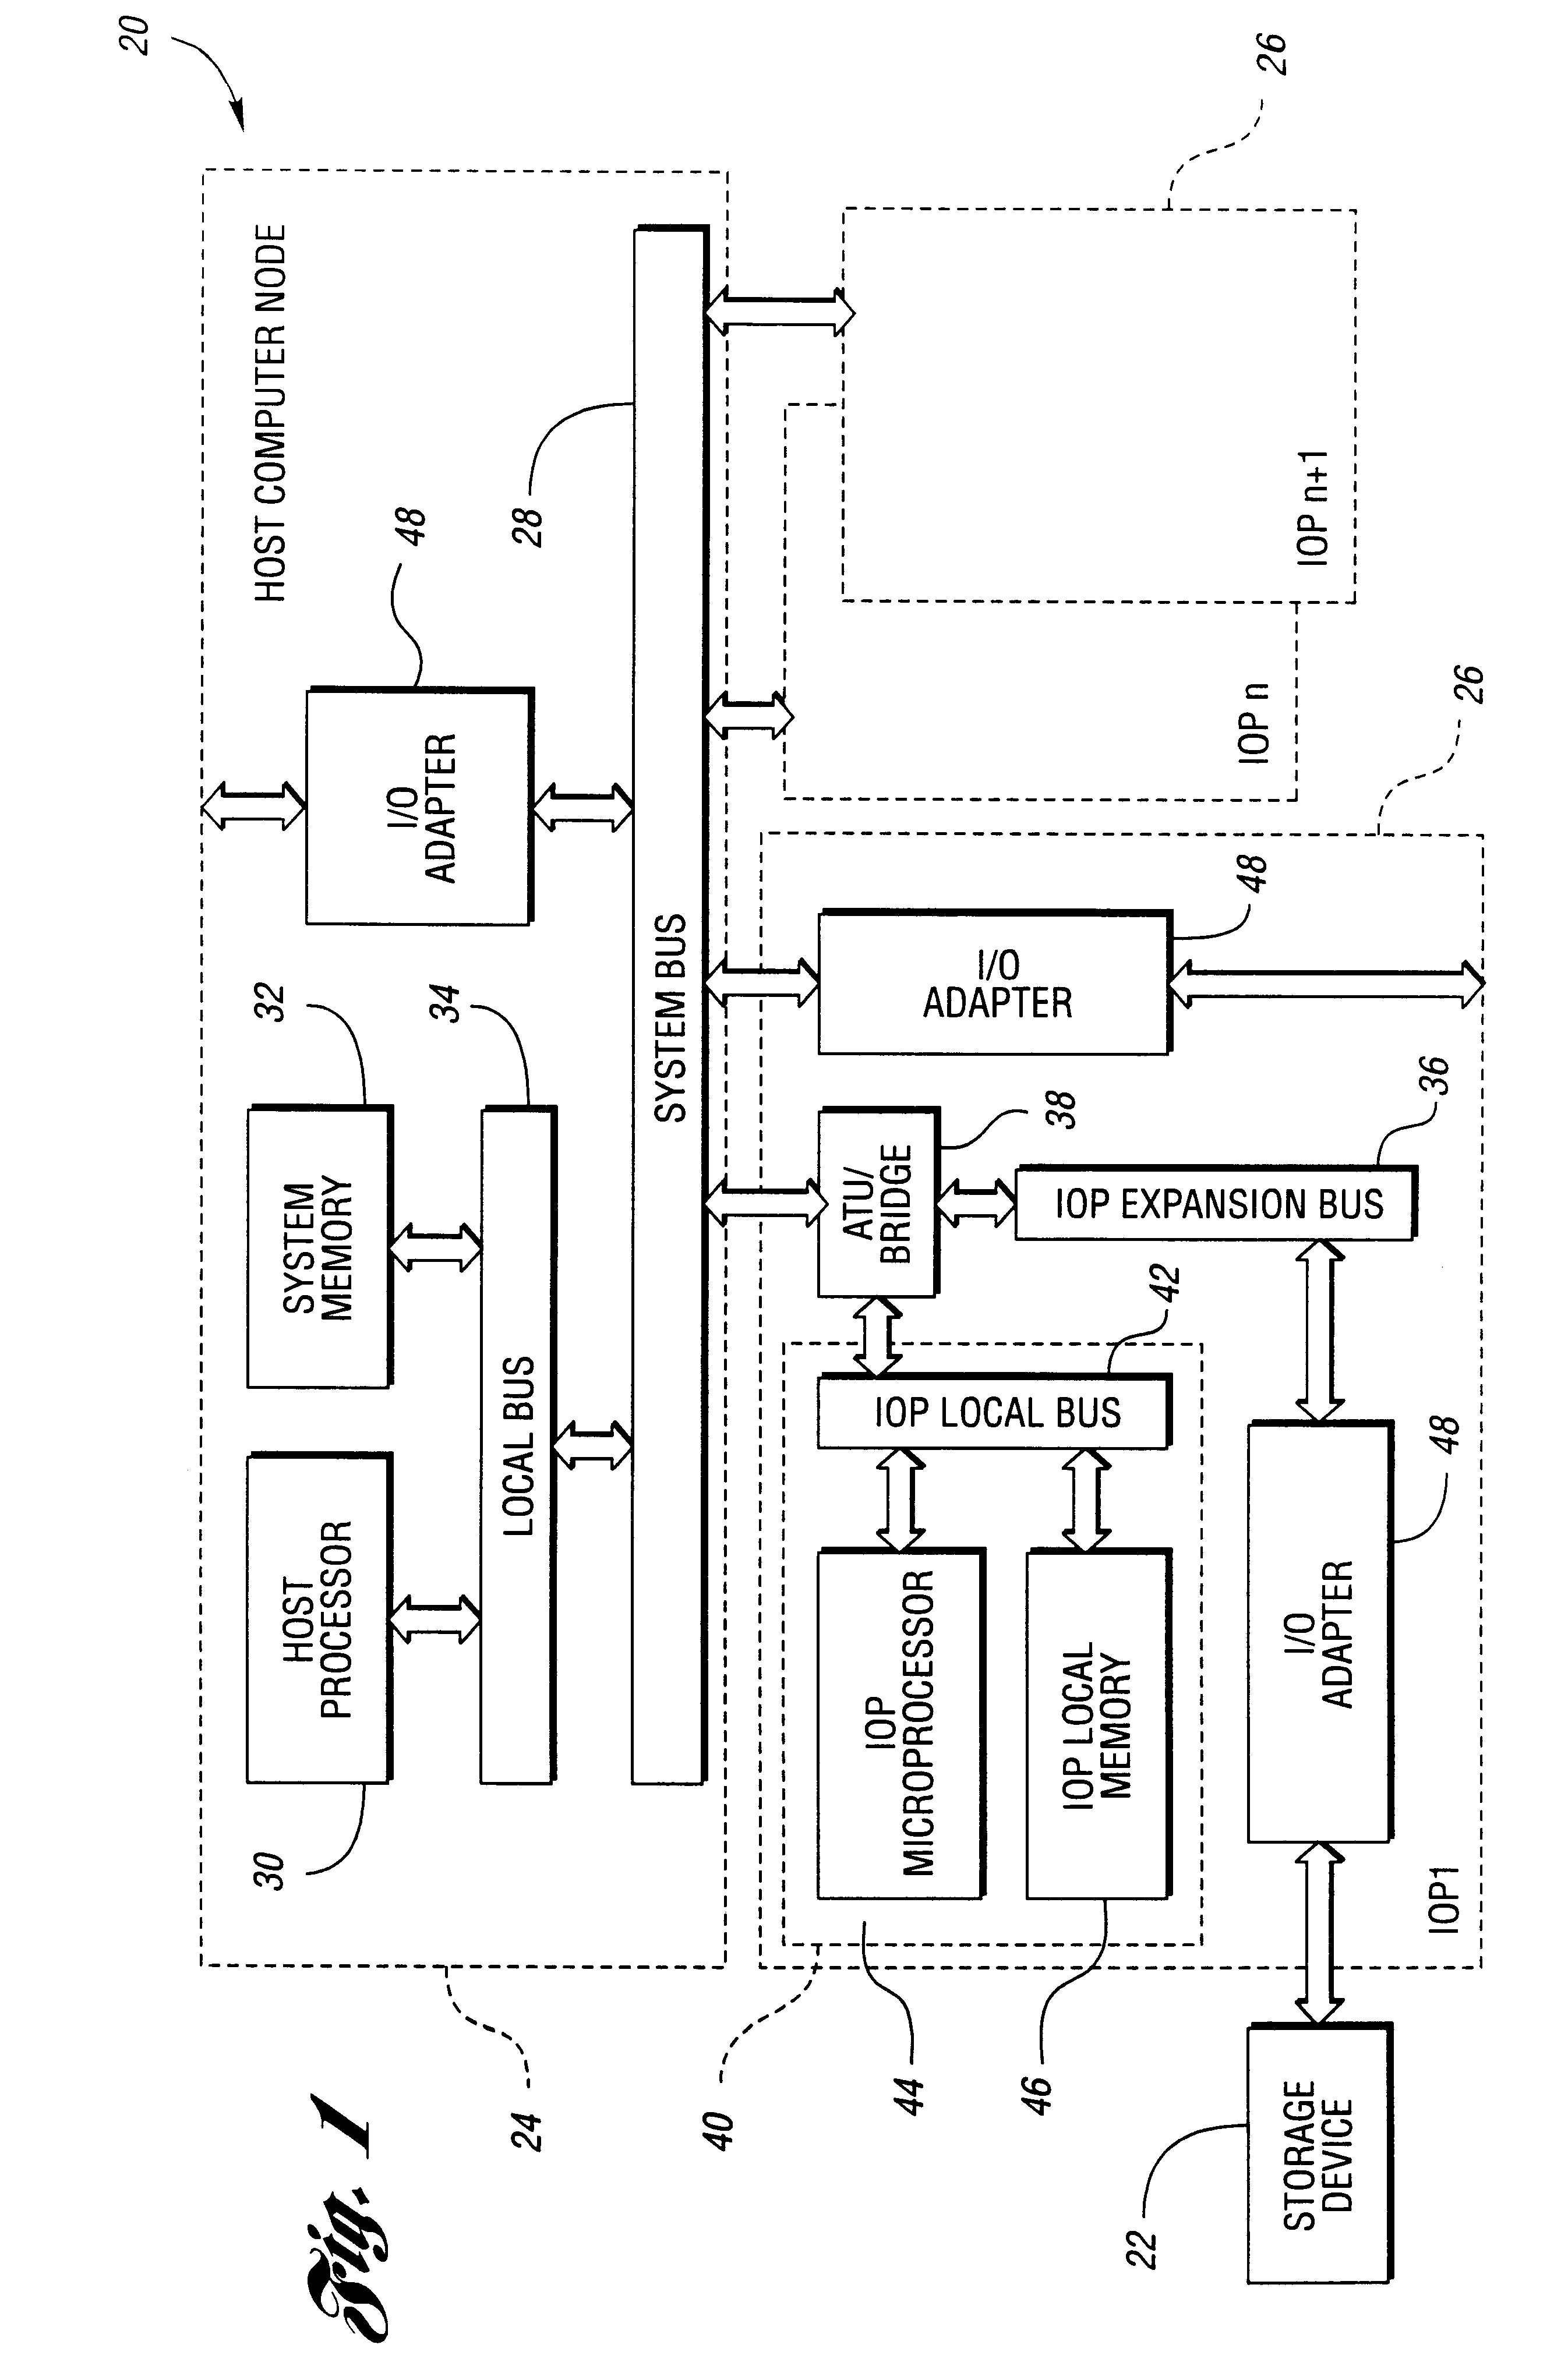 Computer system with storage device mapping input/output processor